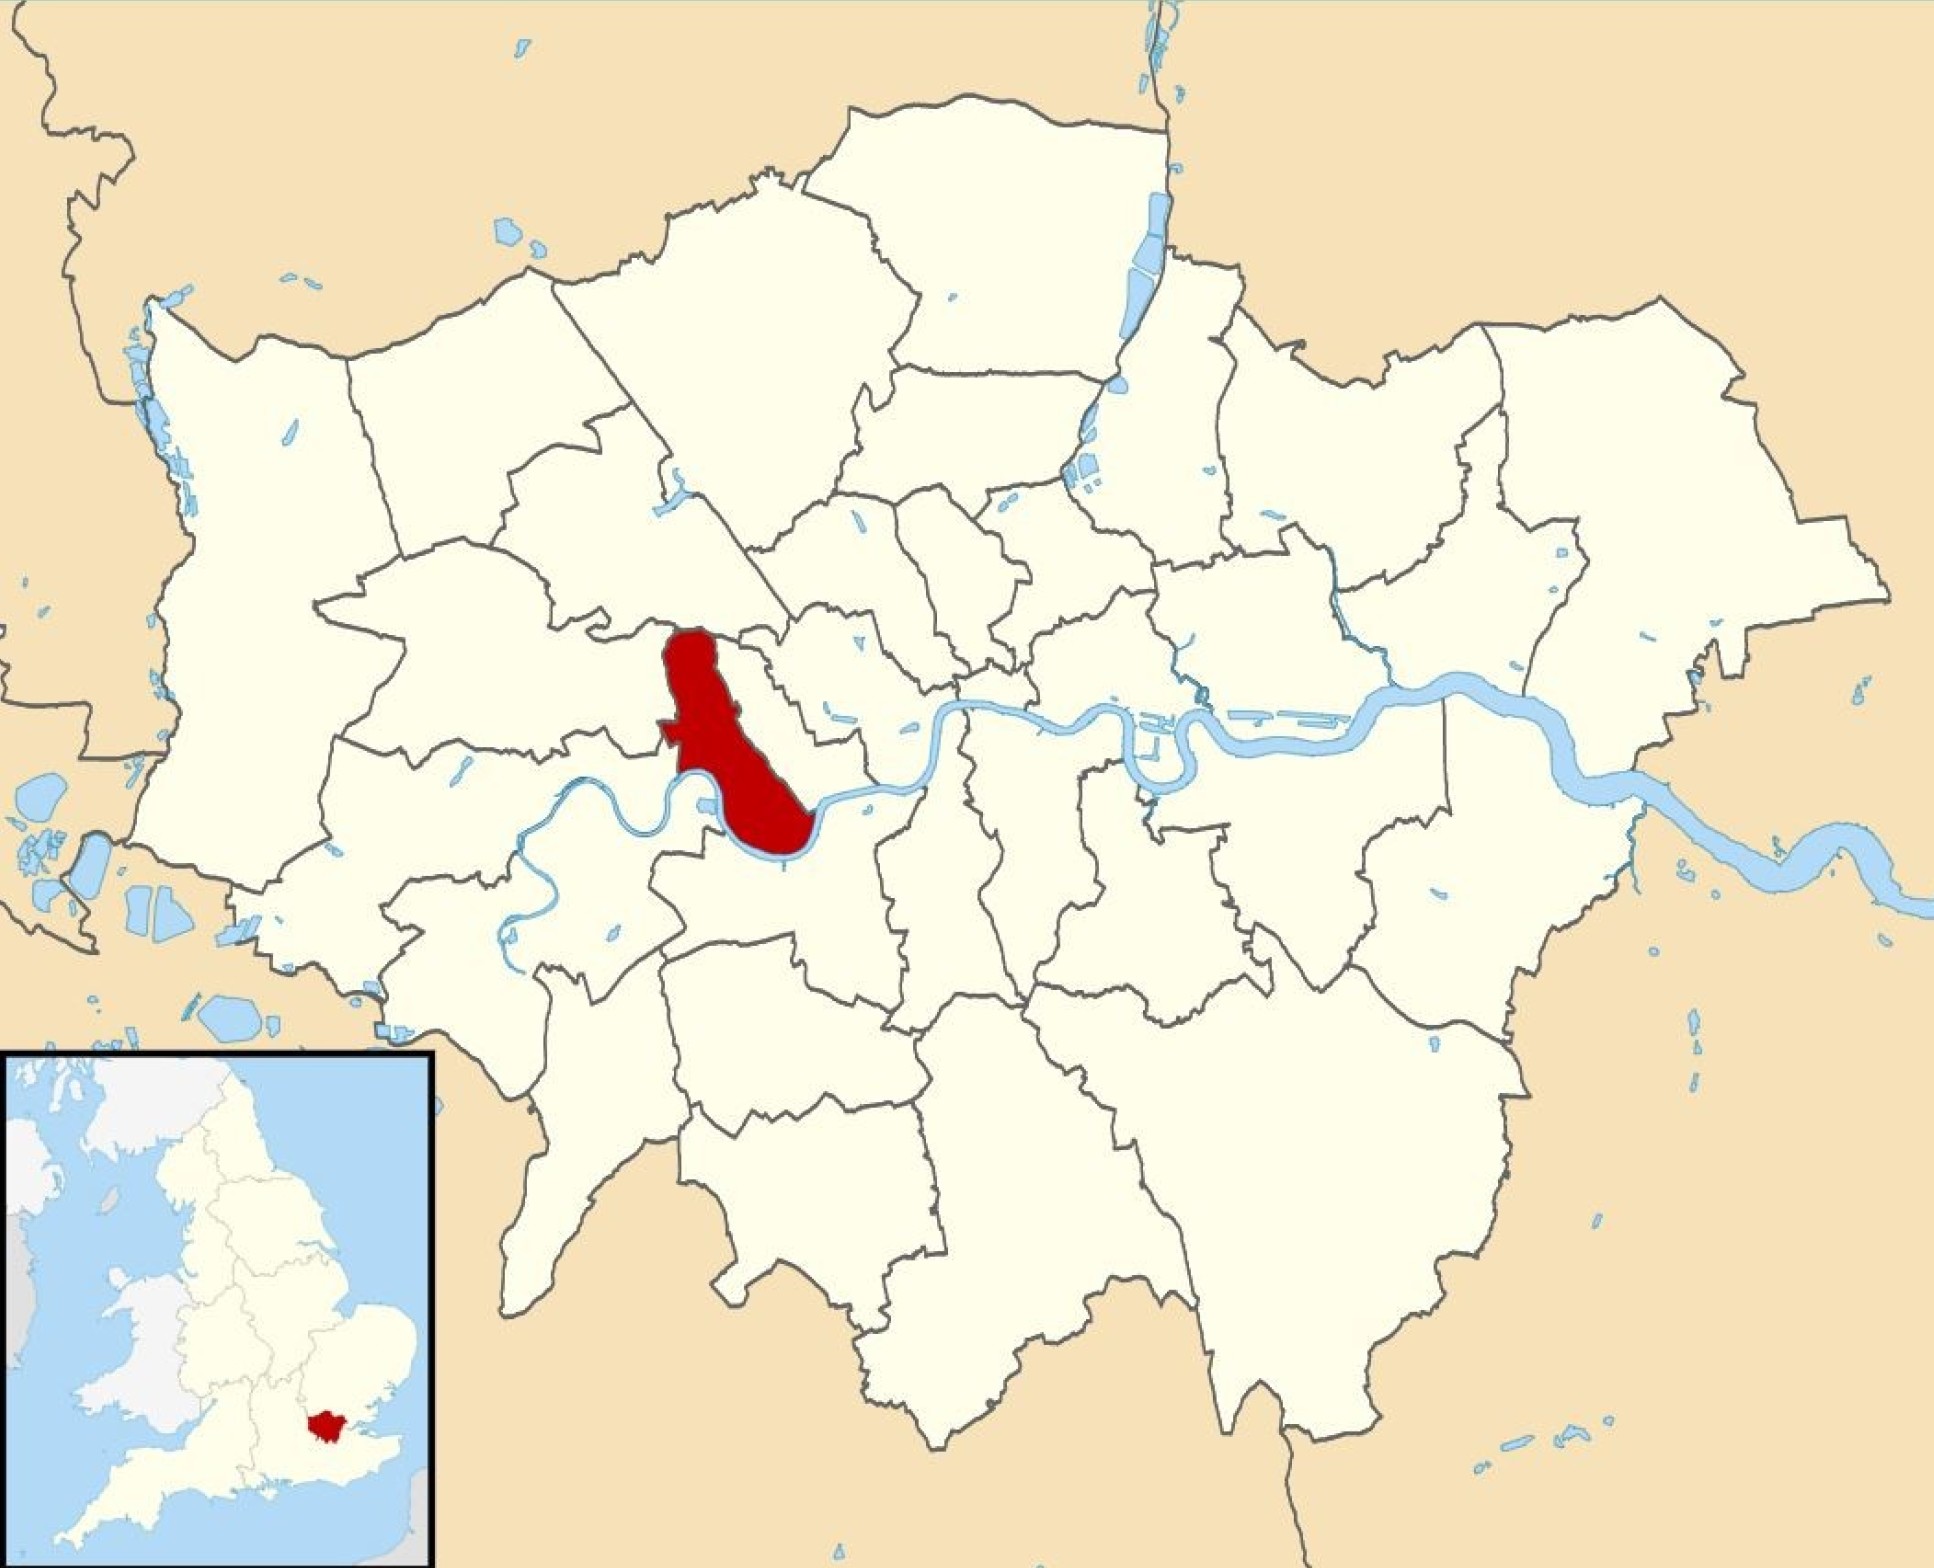 Map of Hammersmith and Fulham